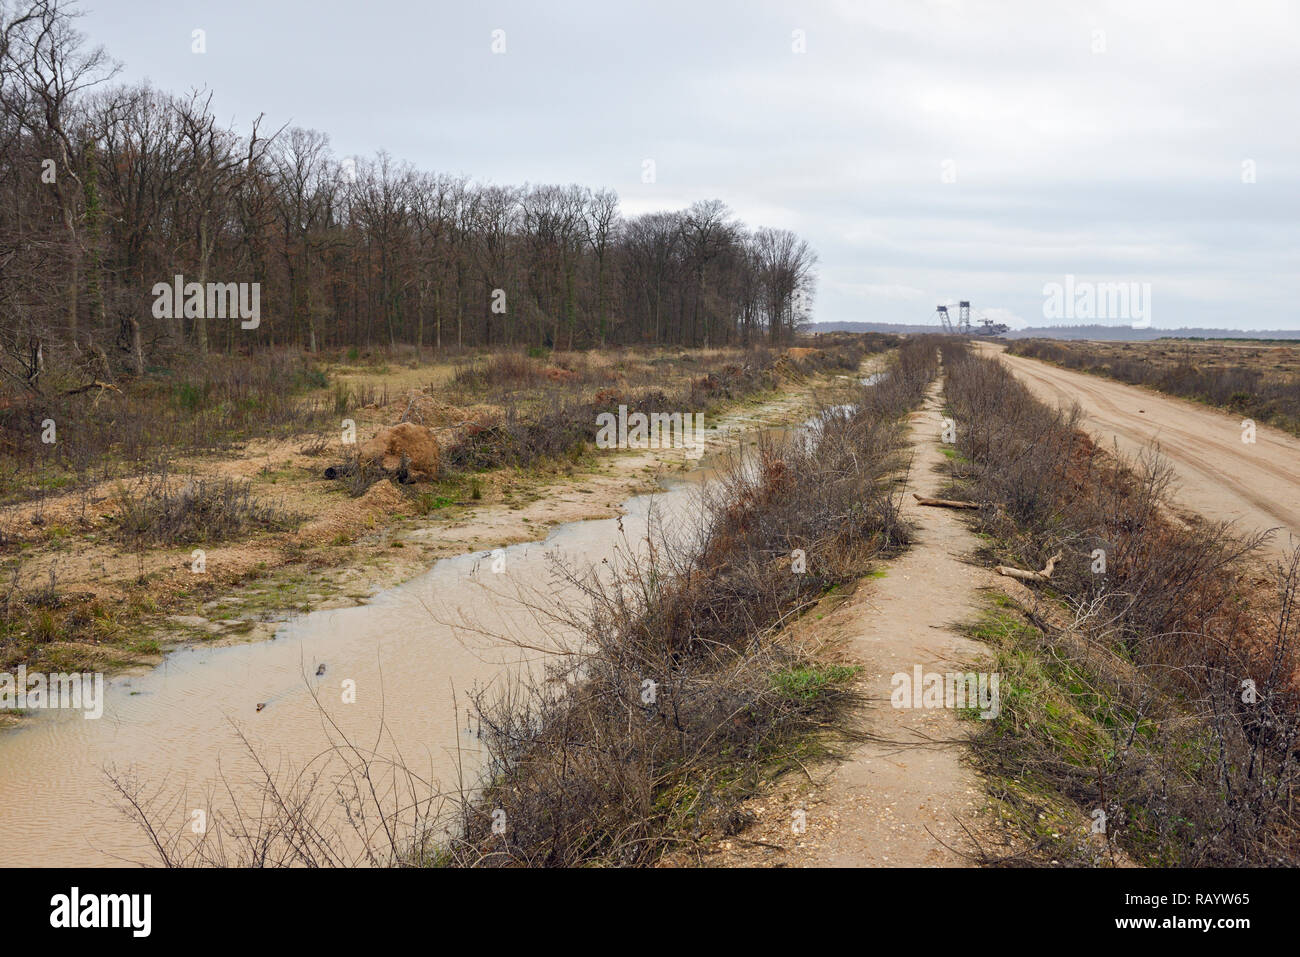 View to the Hambacher Forst, an old natural forest, which becomes a popular symbol in the fight against global warming. Stock Photo